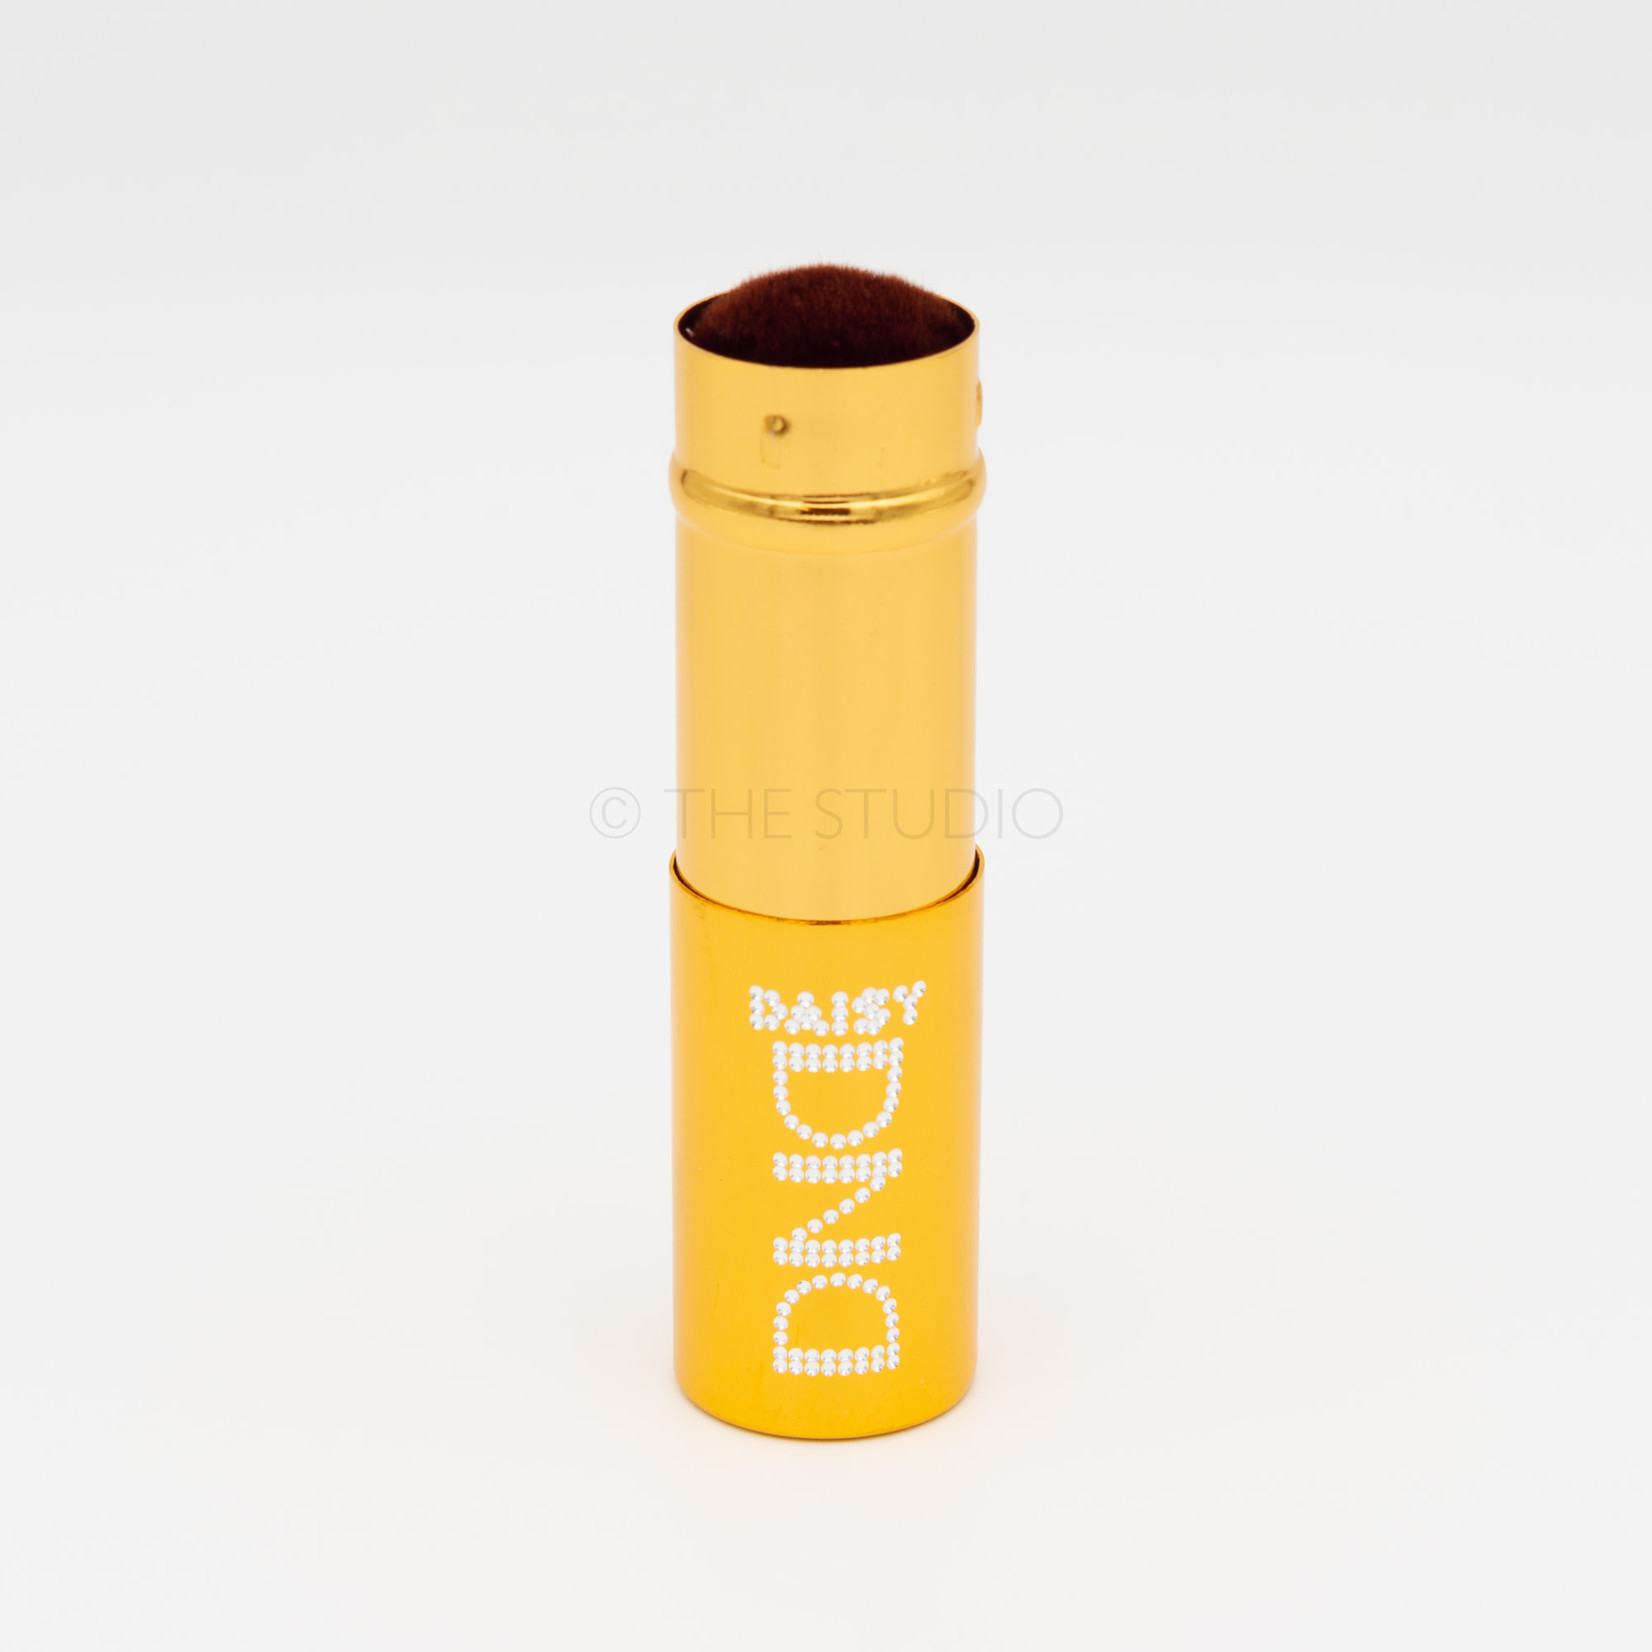 DND DND - Nail Dust Brush - Gold - Large